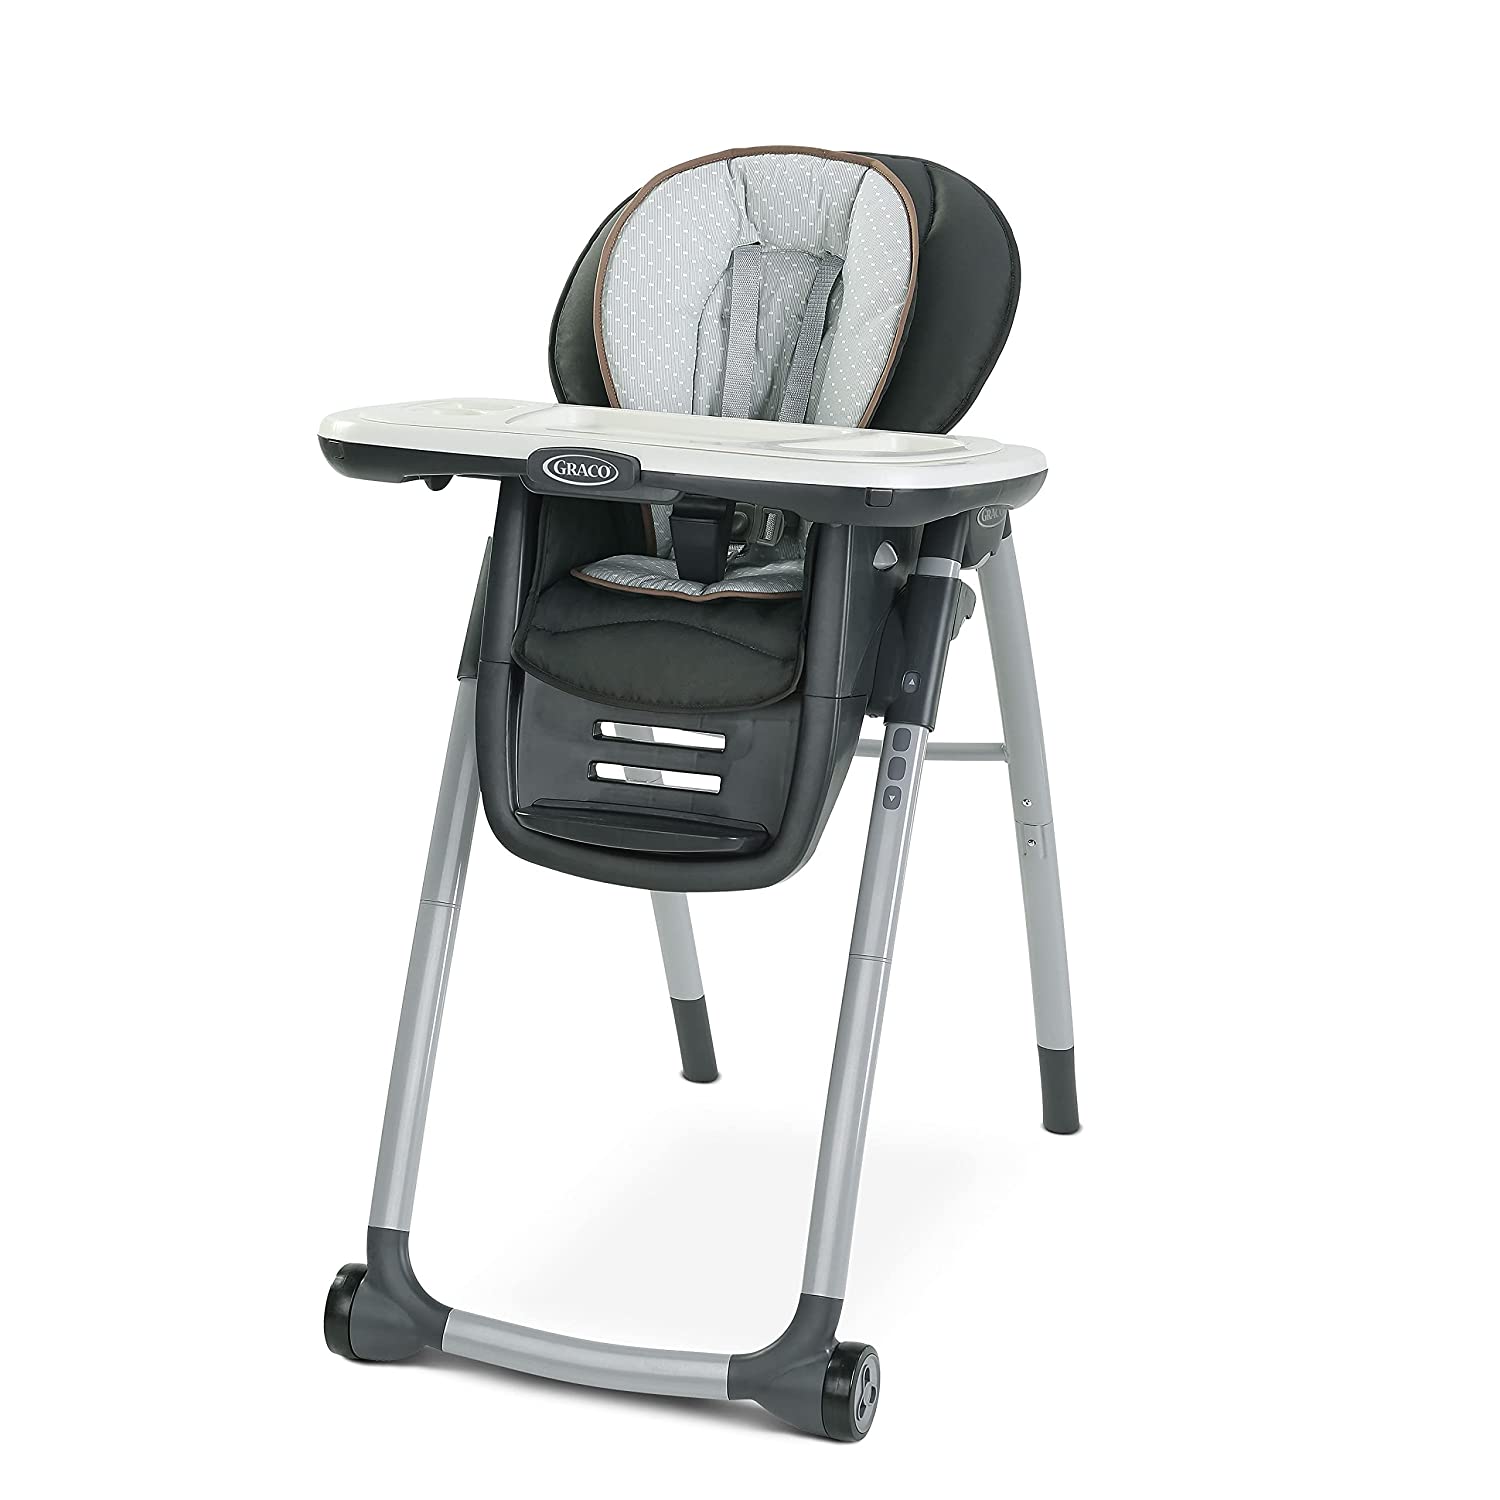 Graco Premier Fold 7-in-1 Convertible High Chair